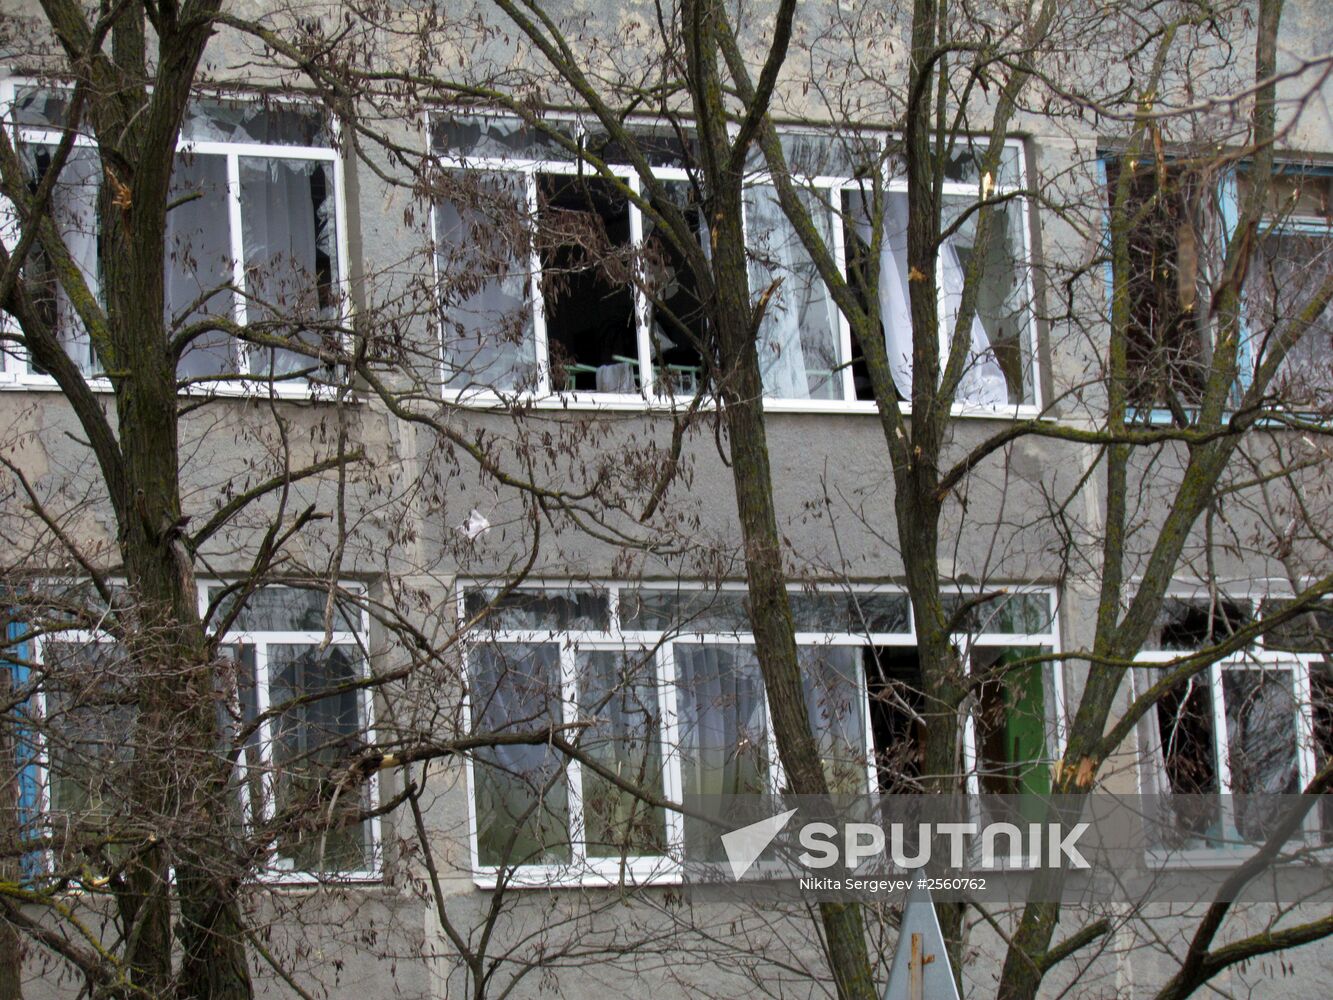 Mariupol after shelling